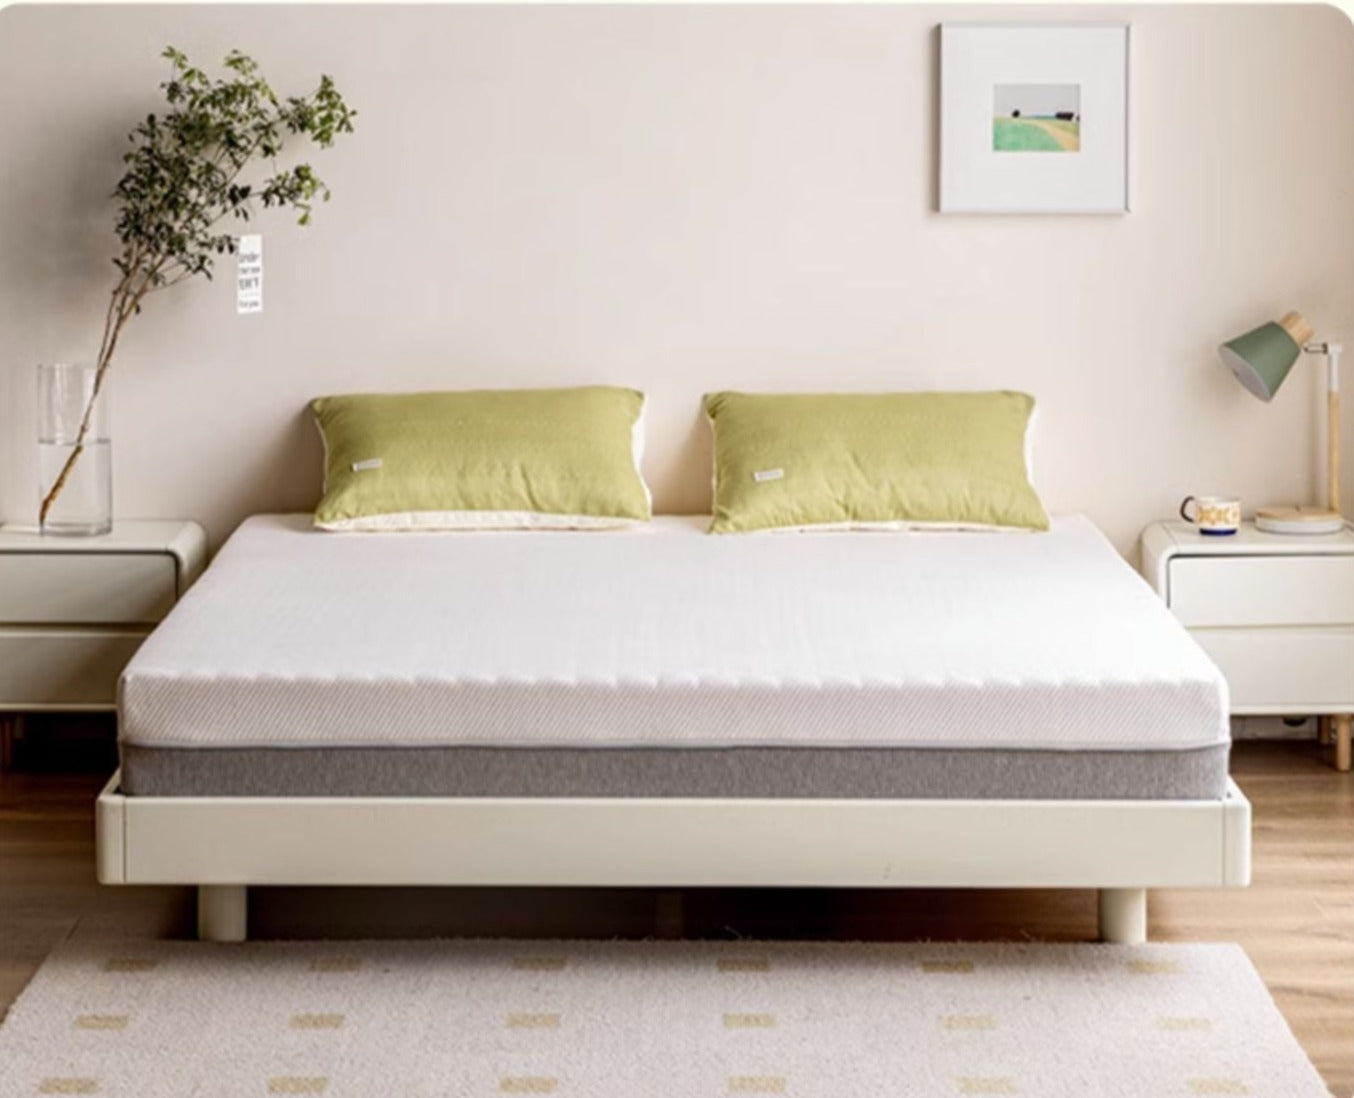 Simmons Spring Cushion: Antibacterial, Anti-Mite Power Sponge Mattress with Dynamic Support System